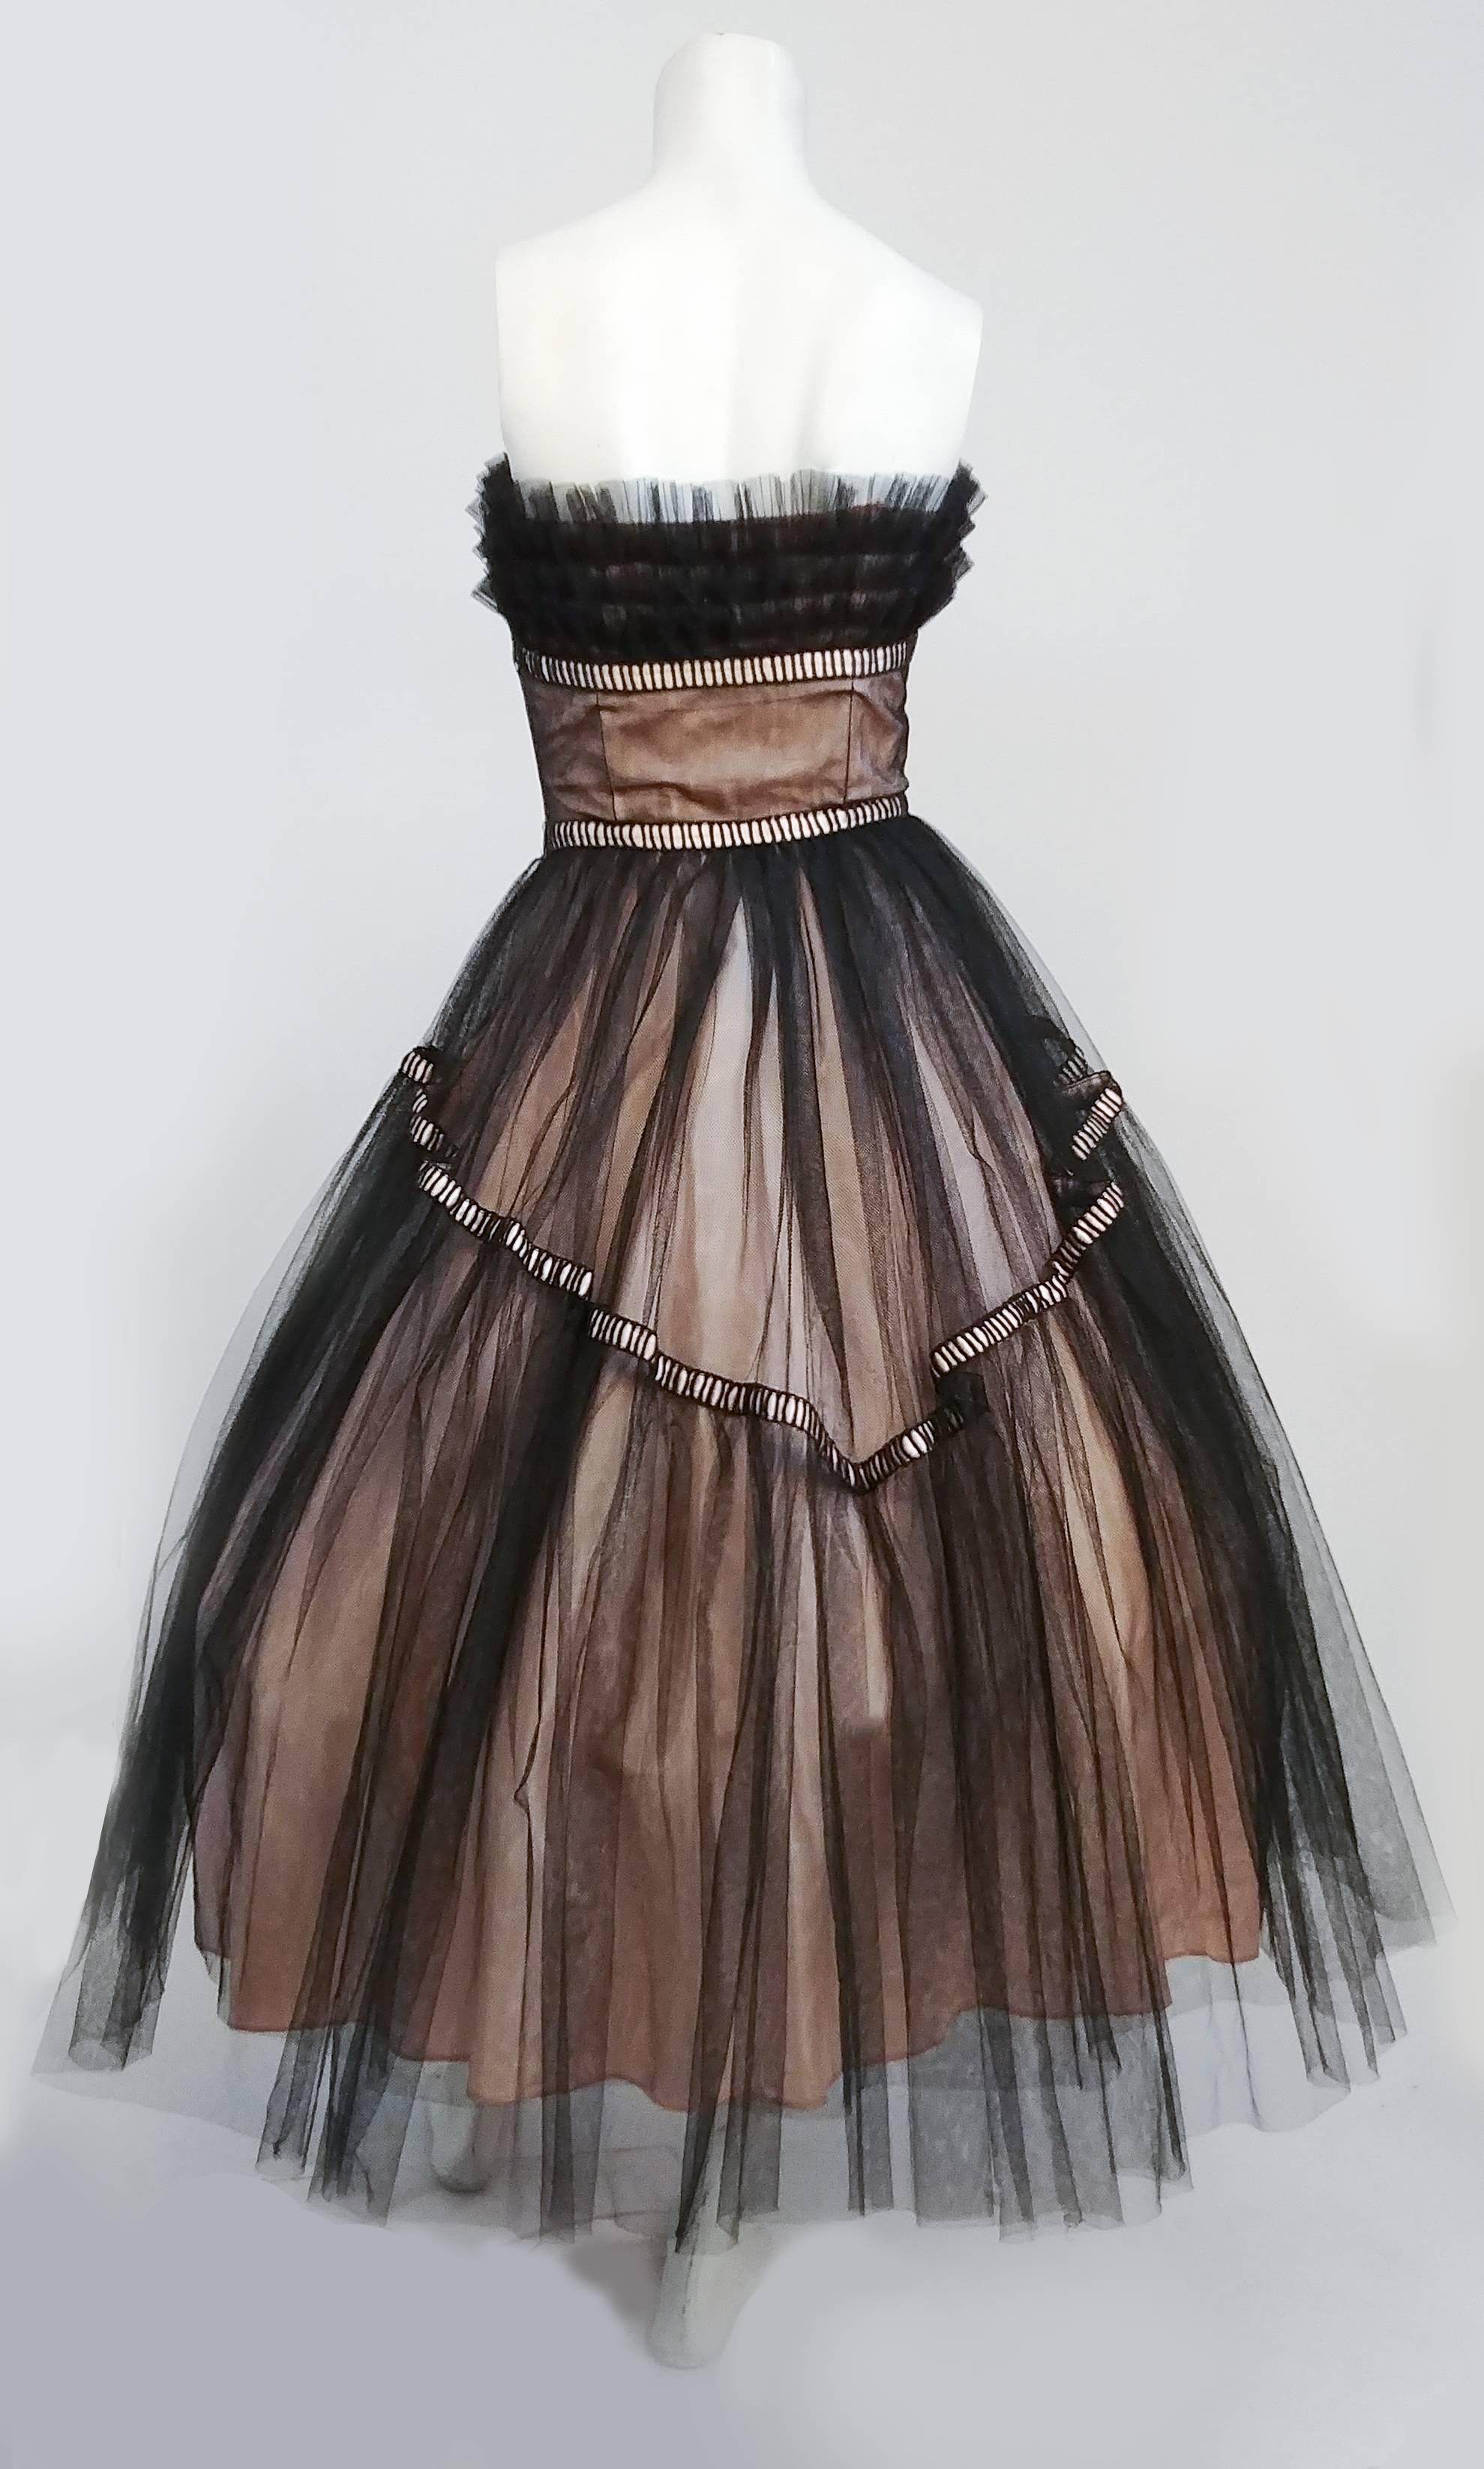 1950s Emma Domb Black and Pink Tulle Party Dress. Ruffled tulle bodice embellished with pearls. Ribbon embellishments. Two layers of black tulle over pink lining. Boned bodice. Worn over large petticoat in photo for full effect. 